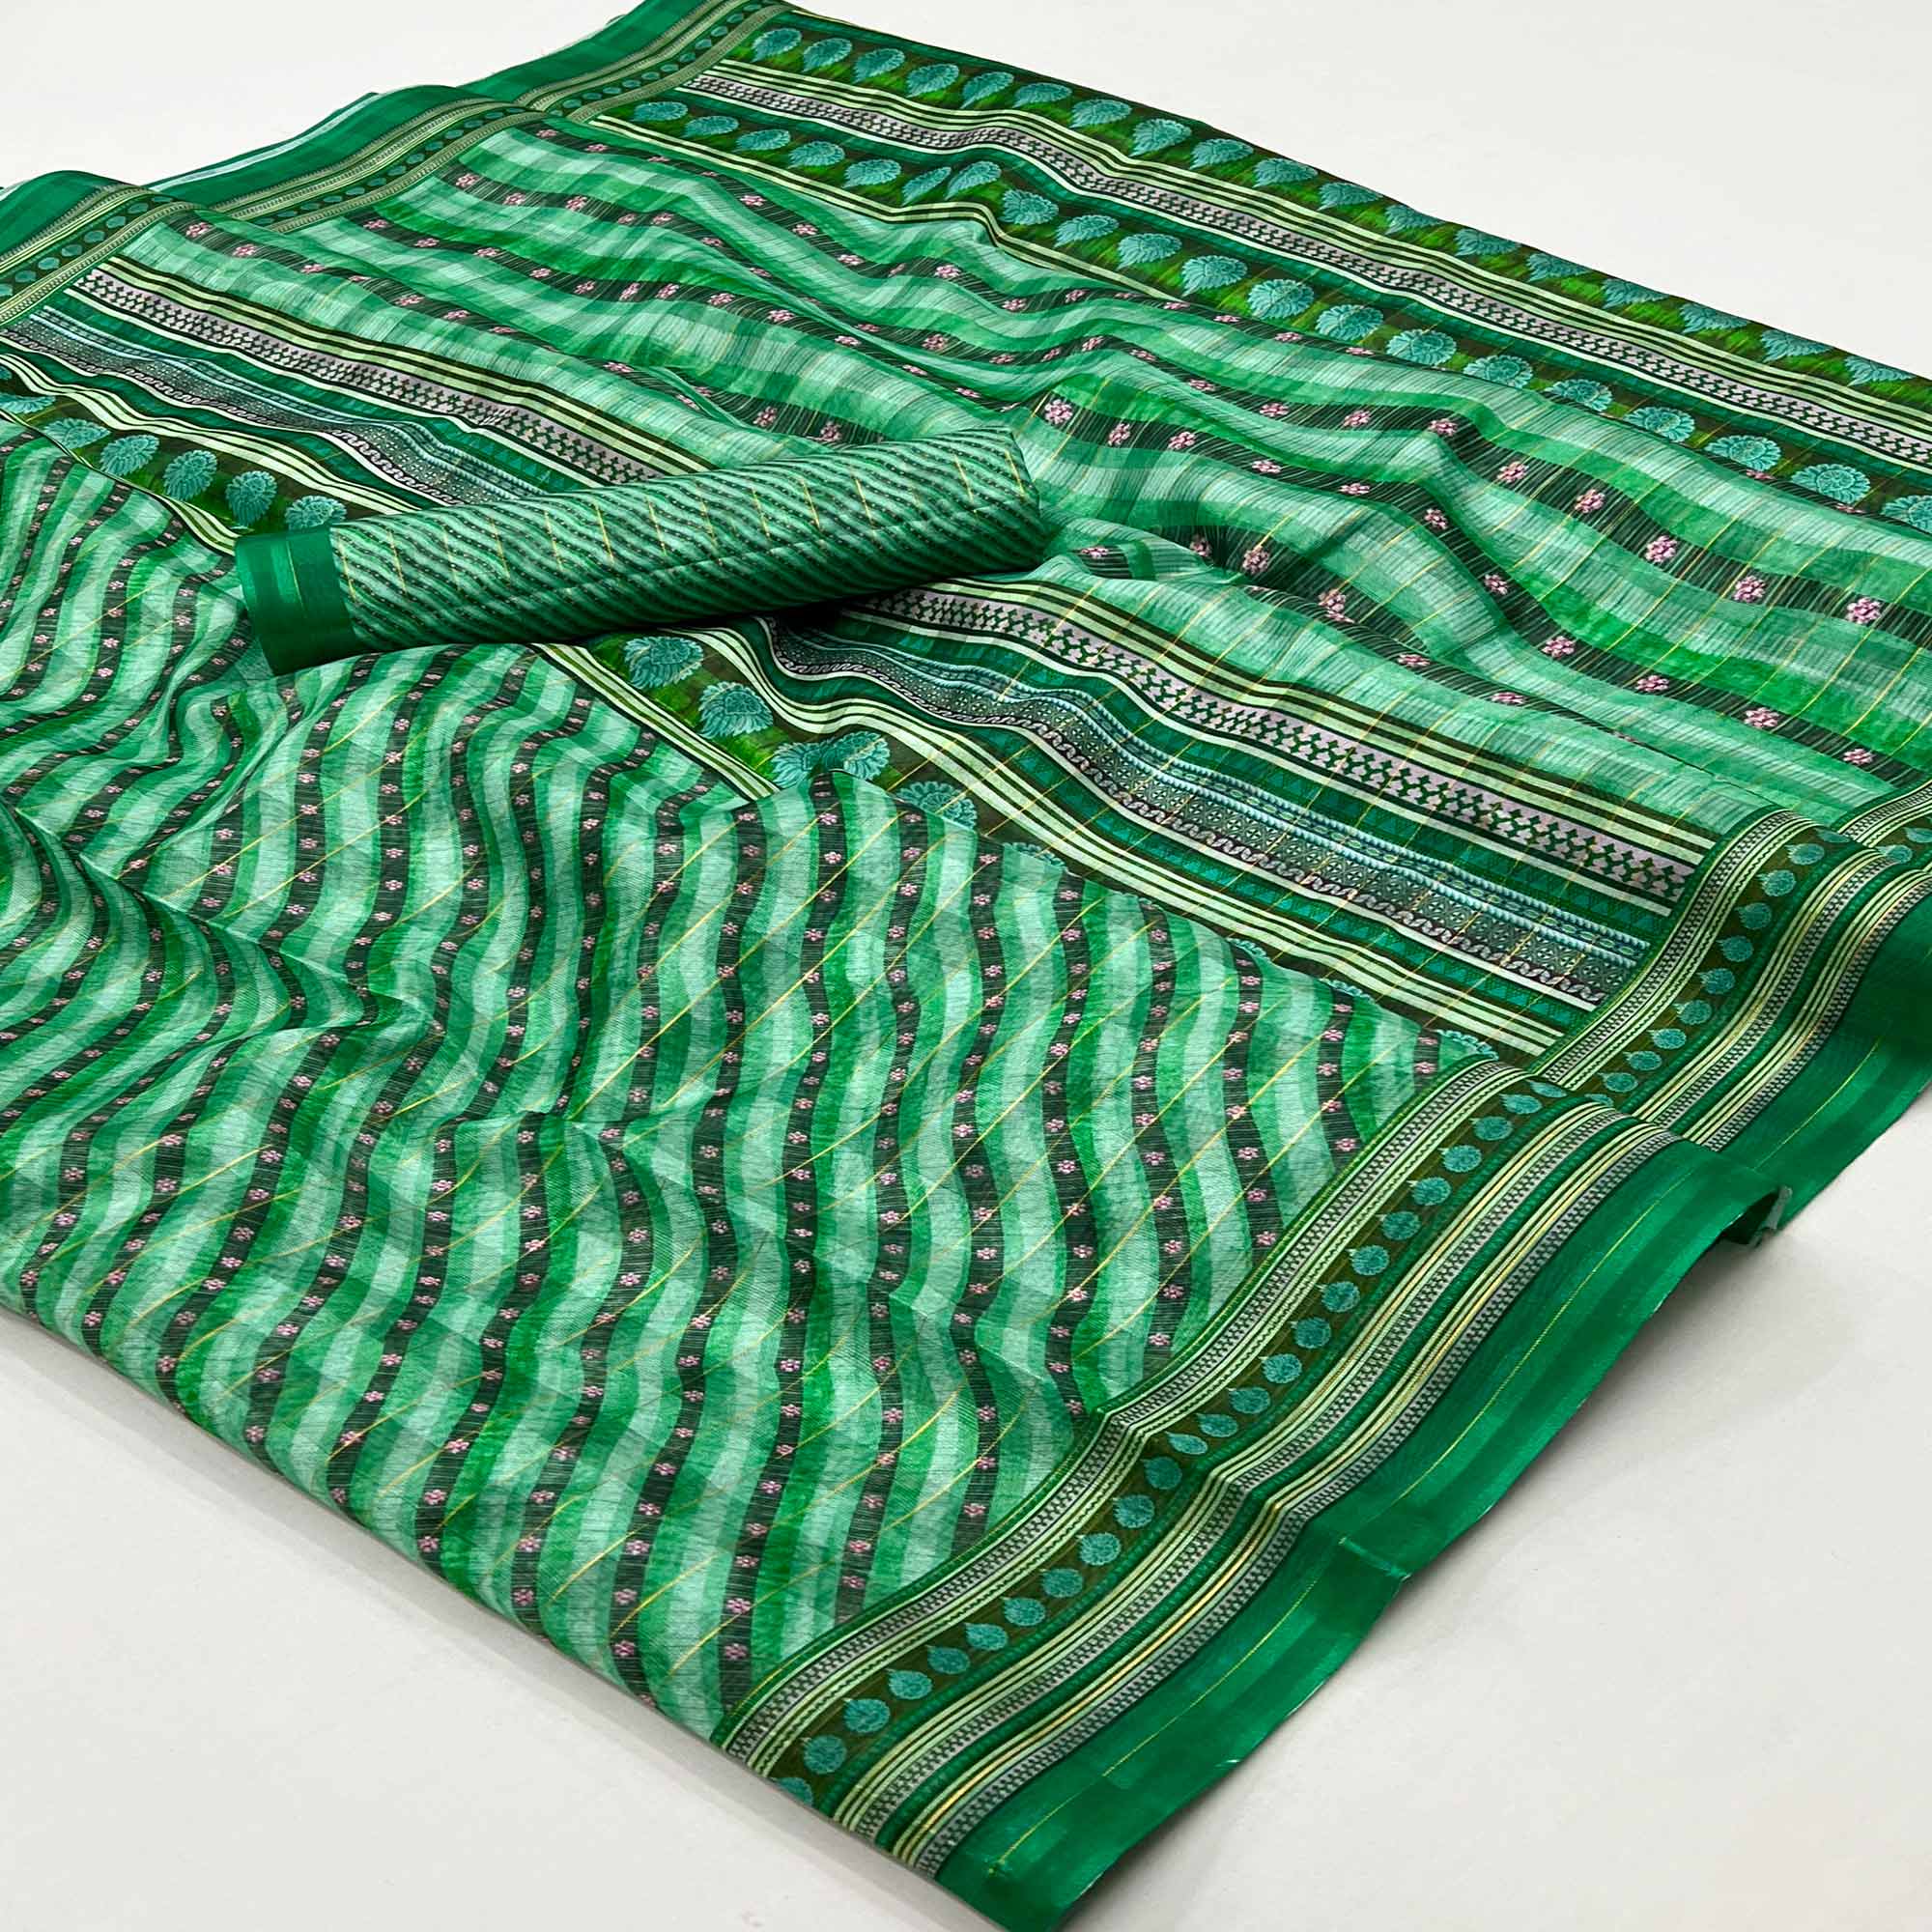 Green Digital Printed Cotton Blend Saree With Fancy Border